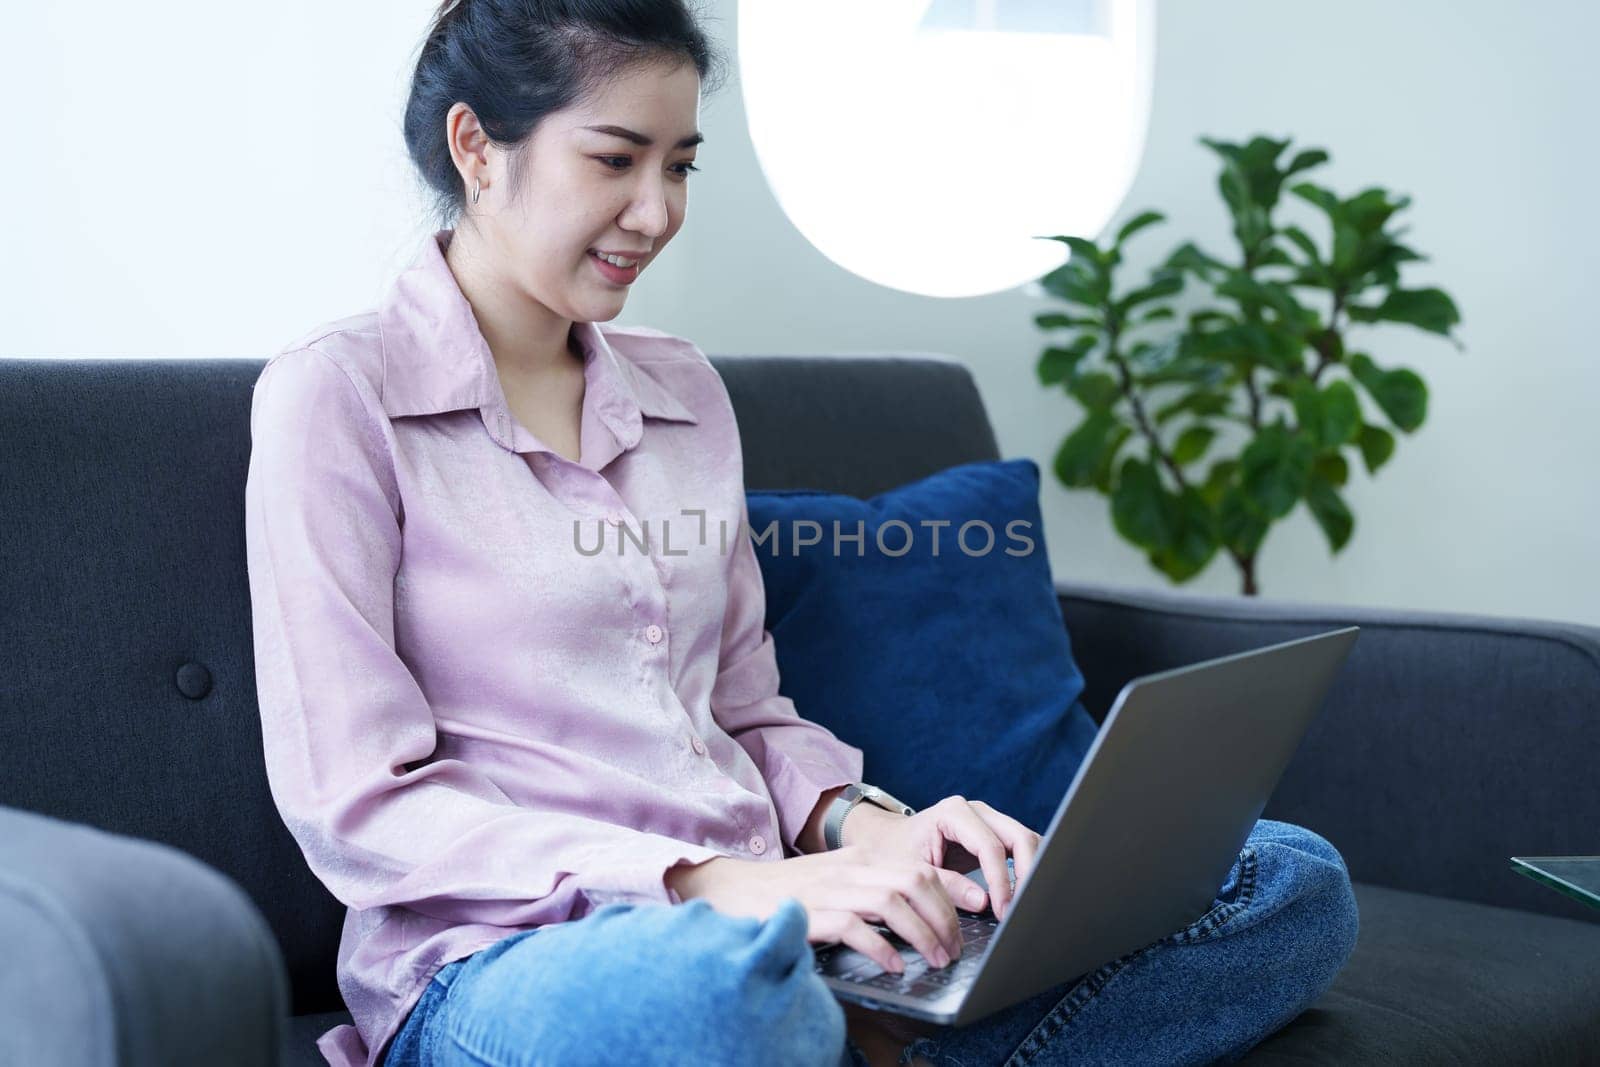 Portrait of a self-employed Asian woman using a computer at home by Manastrong